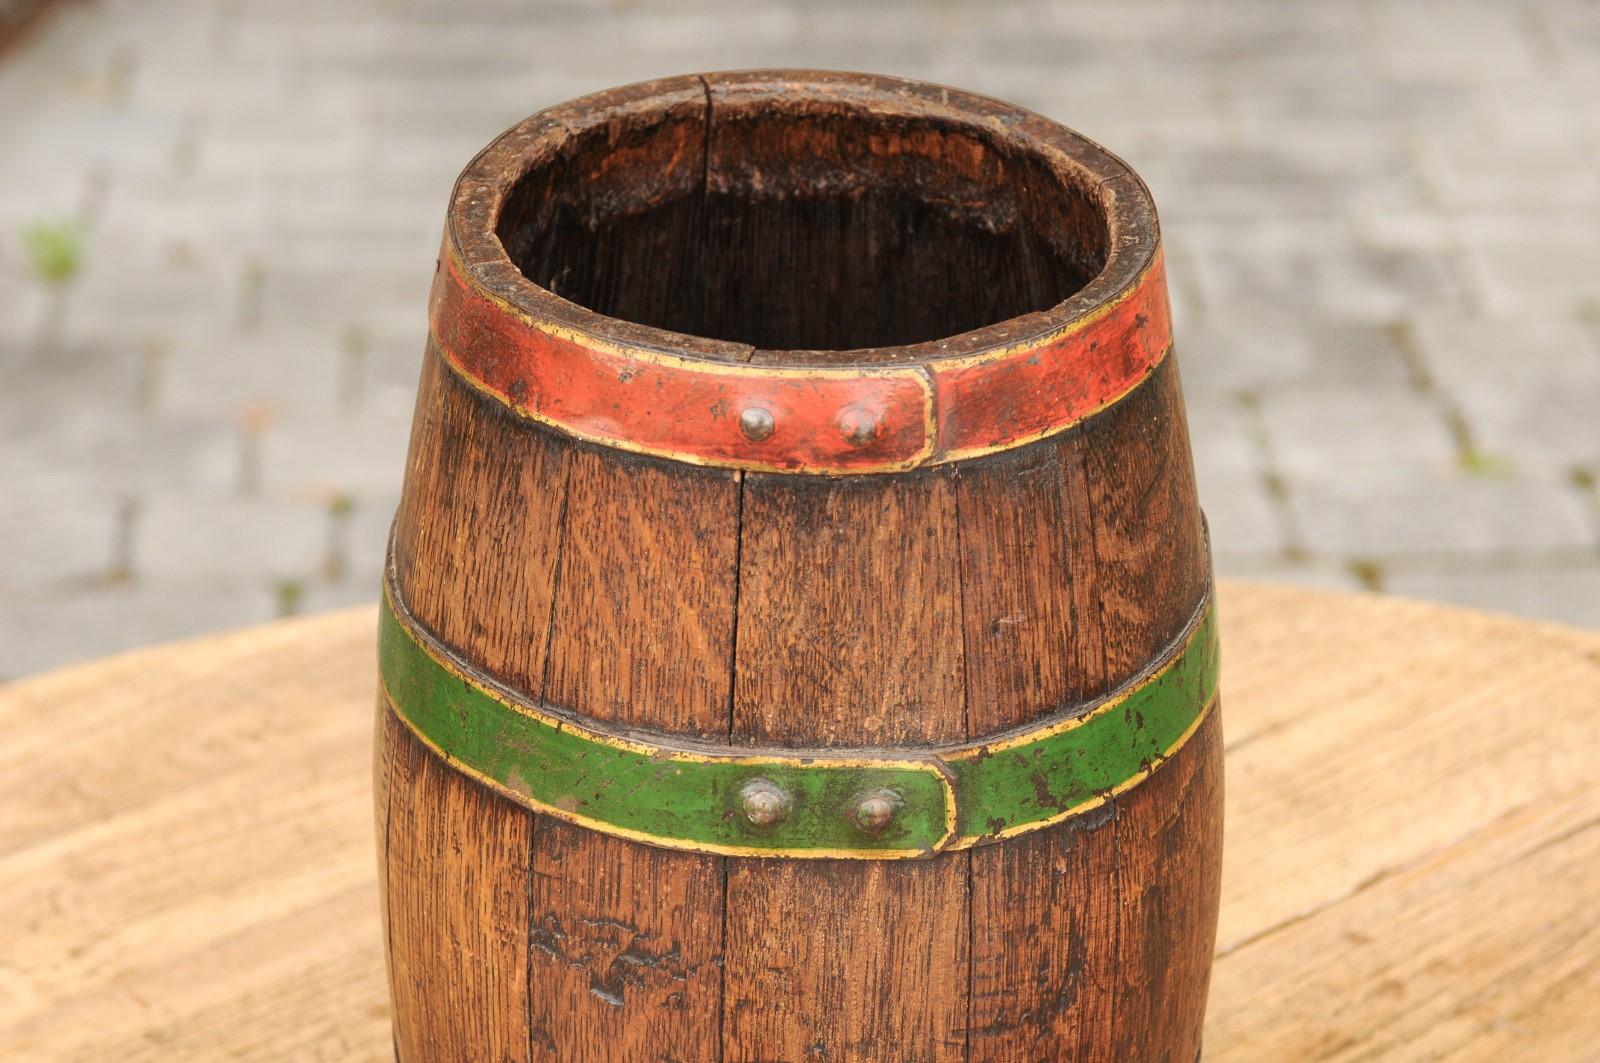 Petite 1900s Rustic English Edwardian Wooden Barrel with Green and Red Accents 3